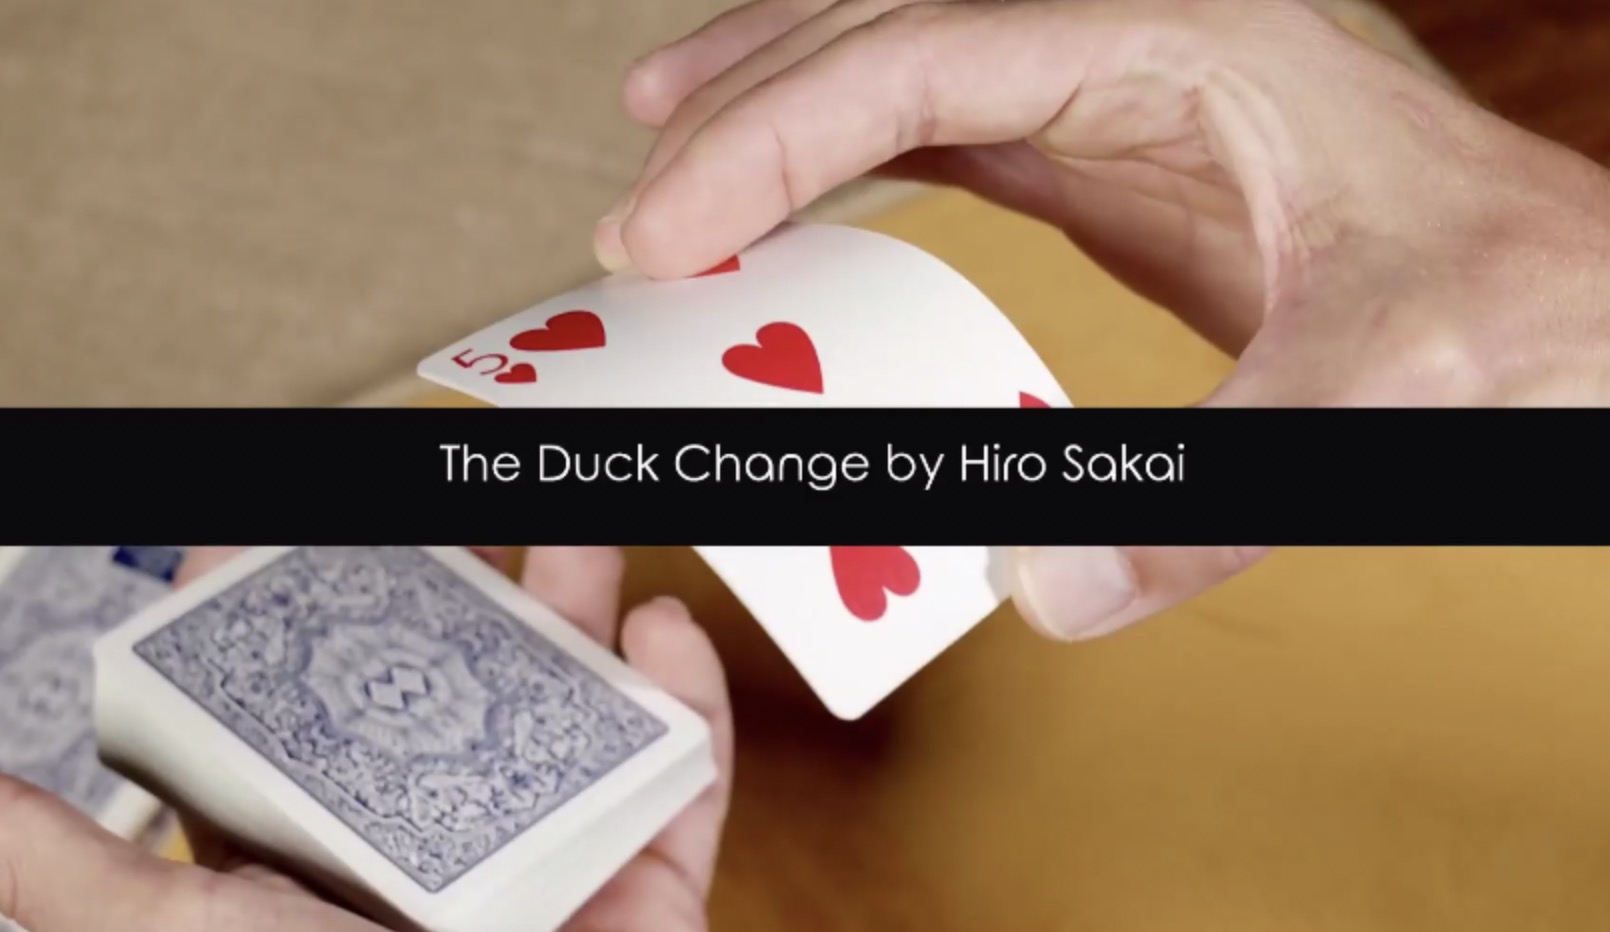 The Duck Change by Hiro Sakai (Video Download 1080p FullHD Quality)